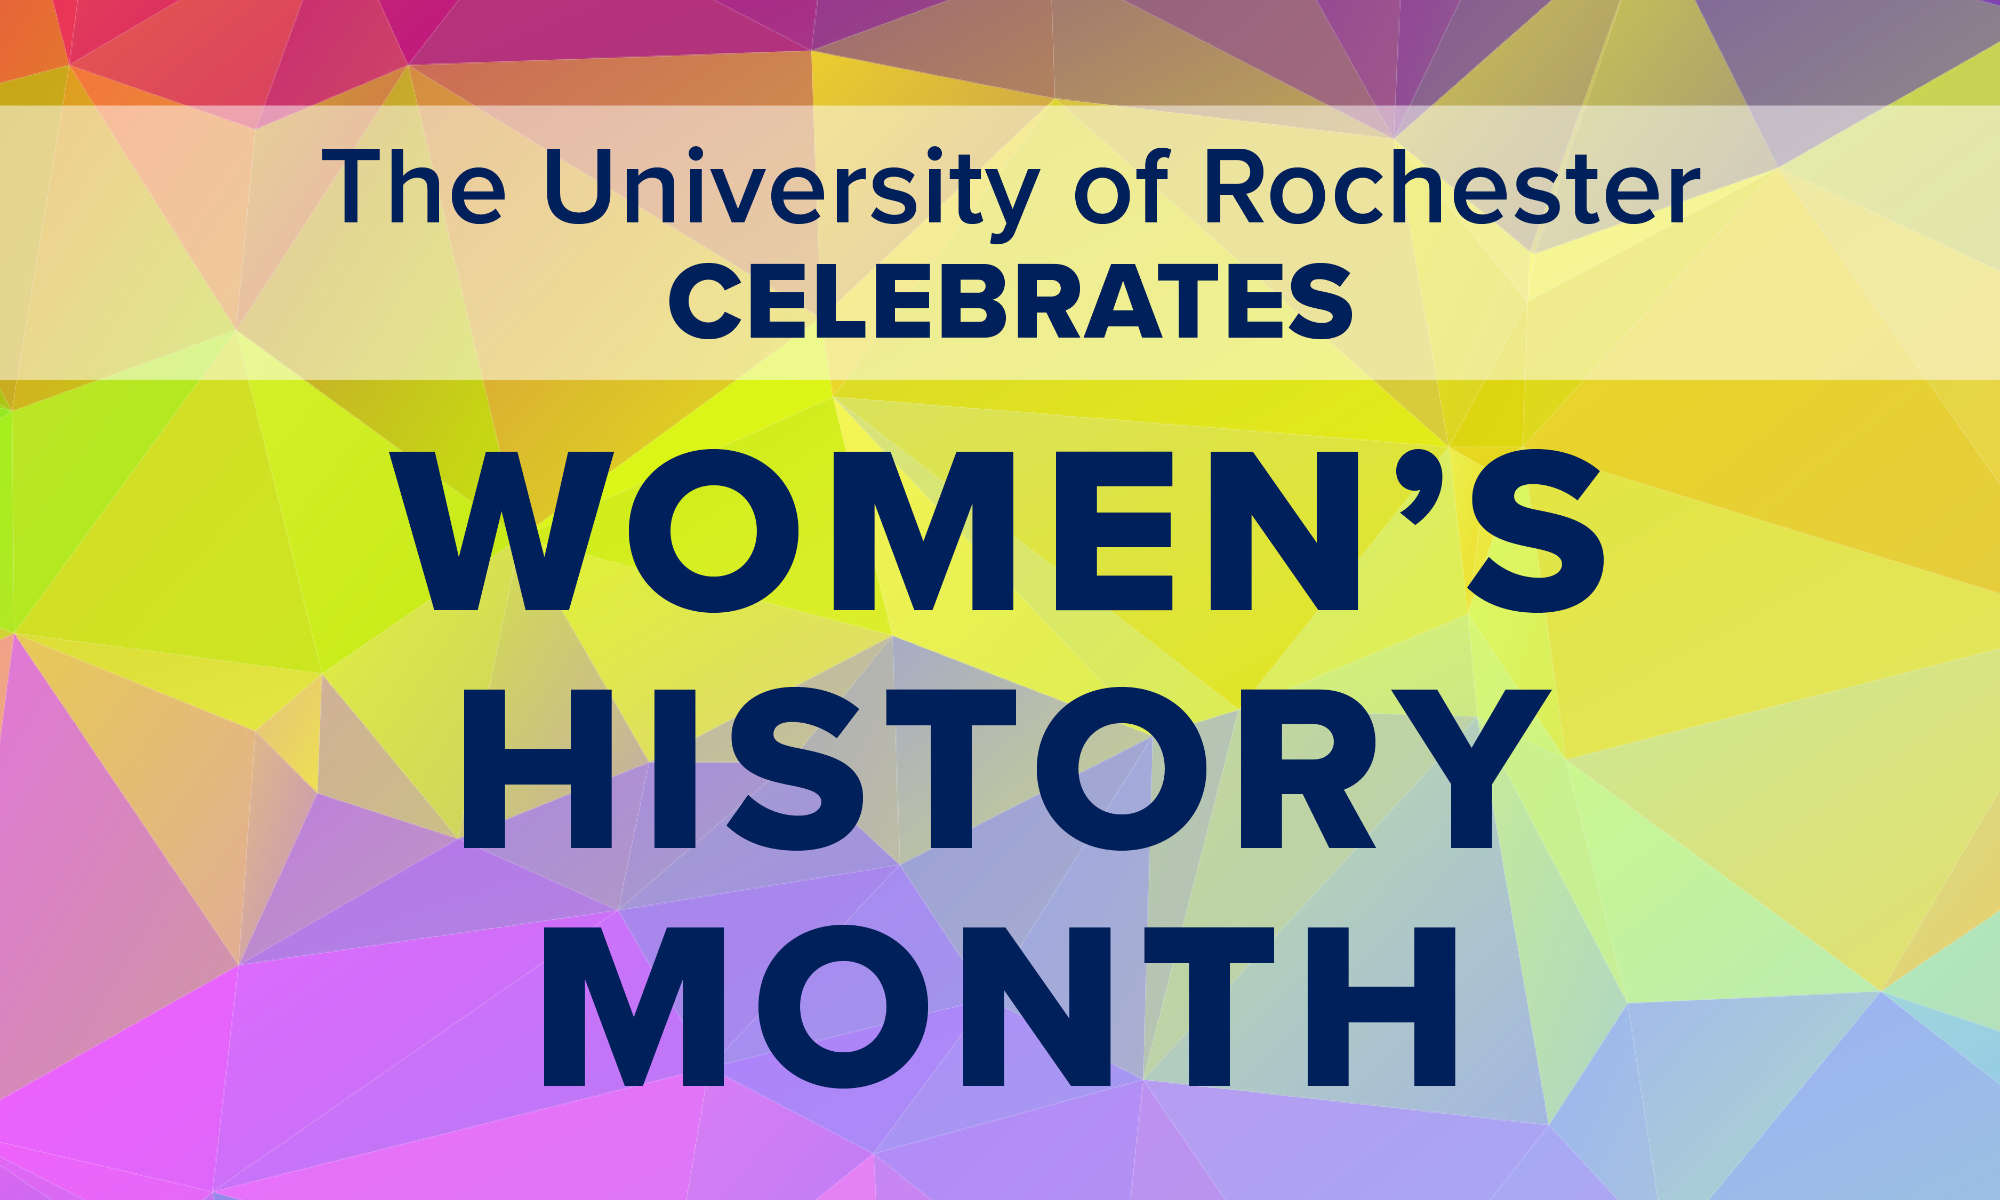 Bright, multicolored, prismatic background with text that reads "The University of Rochester celebrates Women's History Month."